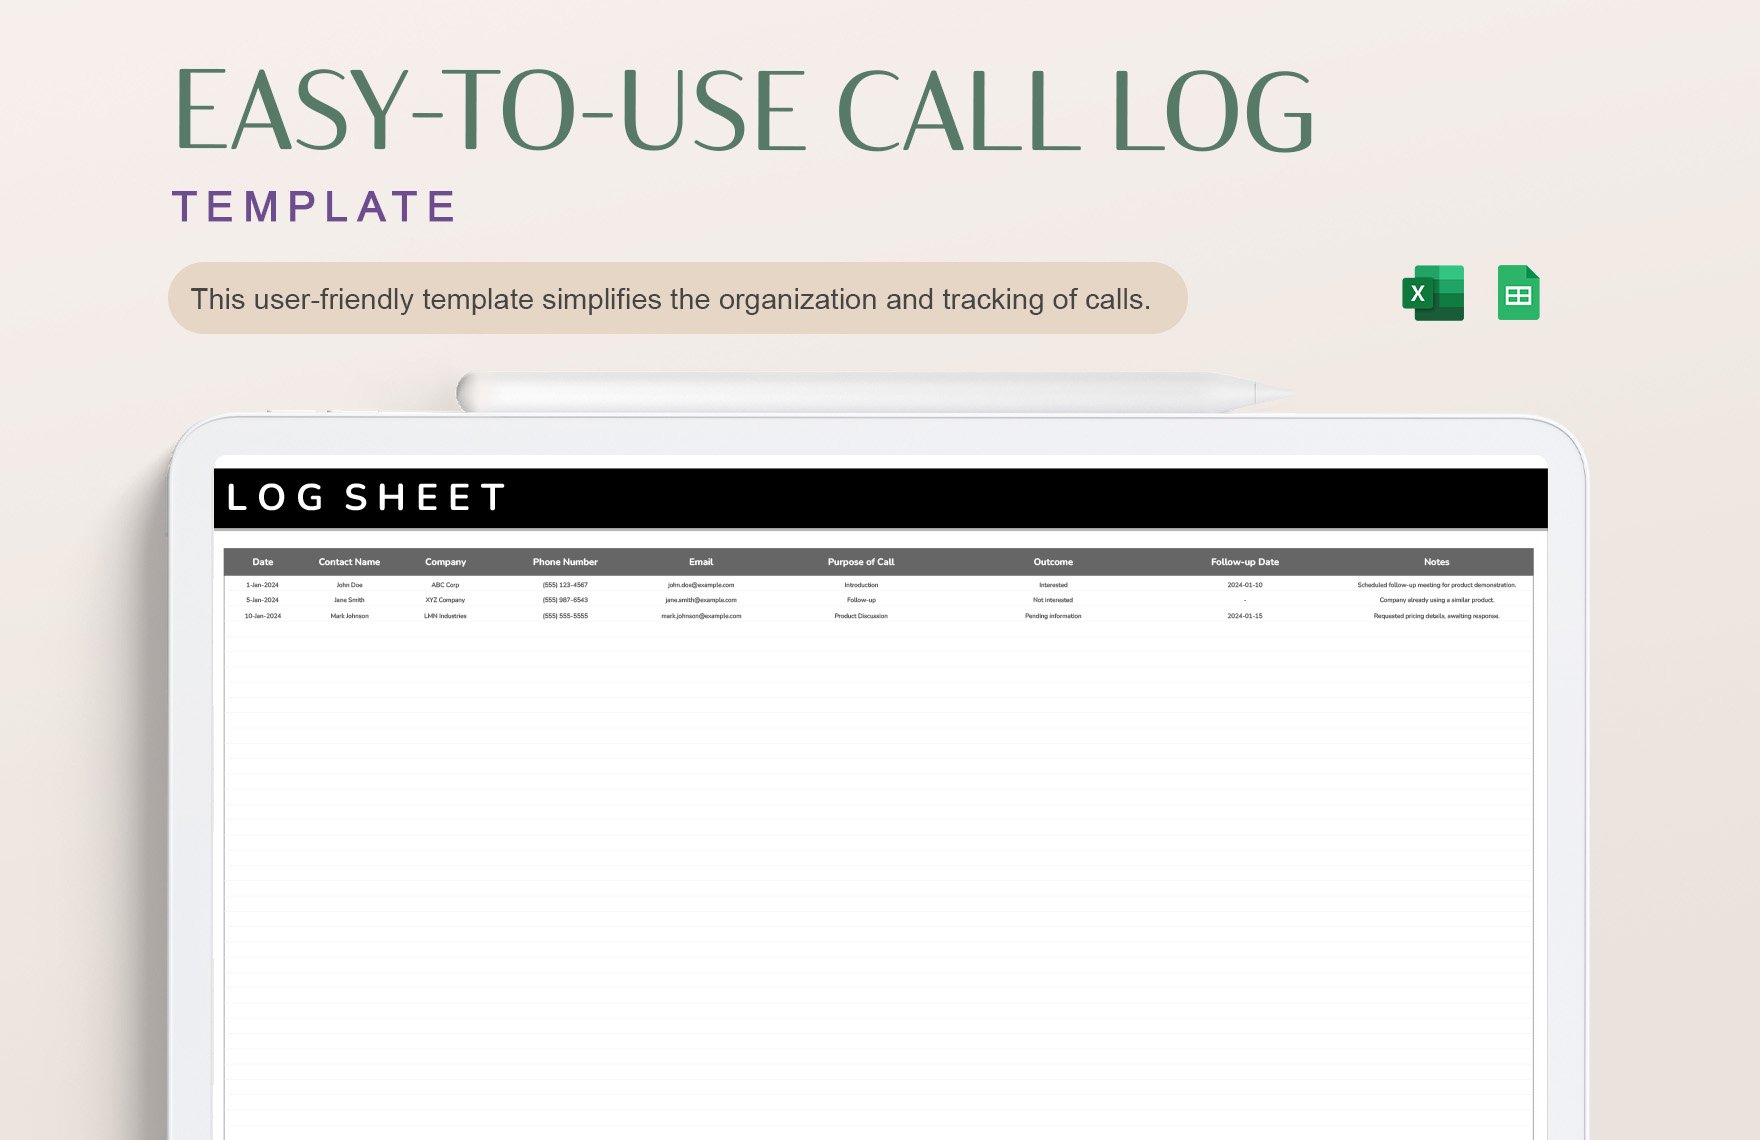 Free Easy-to-Use Call Log Template in Excel, Google Sheets